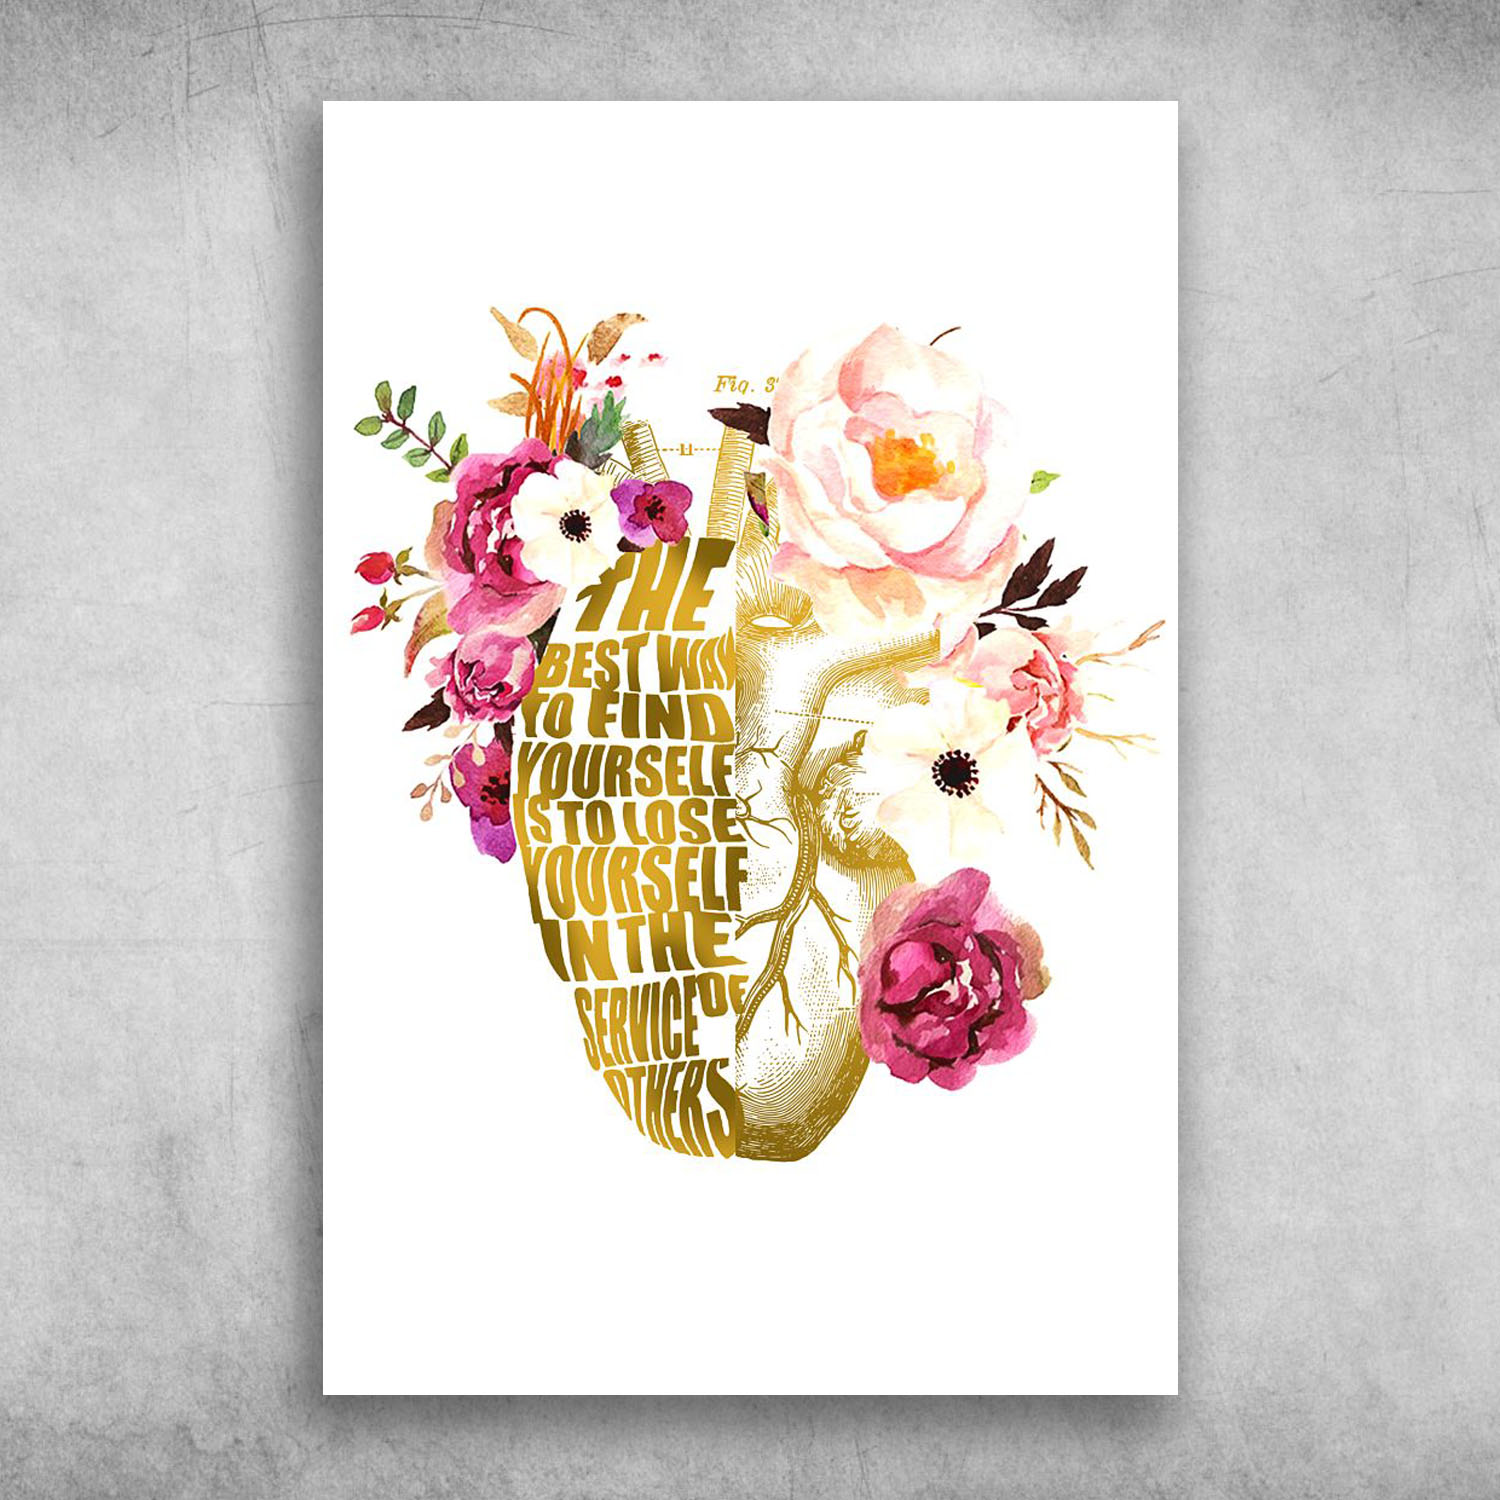 Human Heart Anatomy Floral Heart The Best Way To Find Your Self